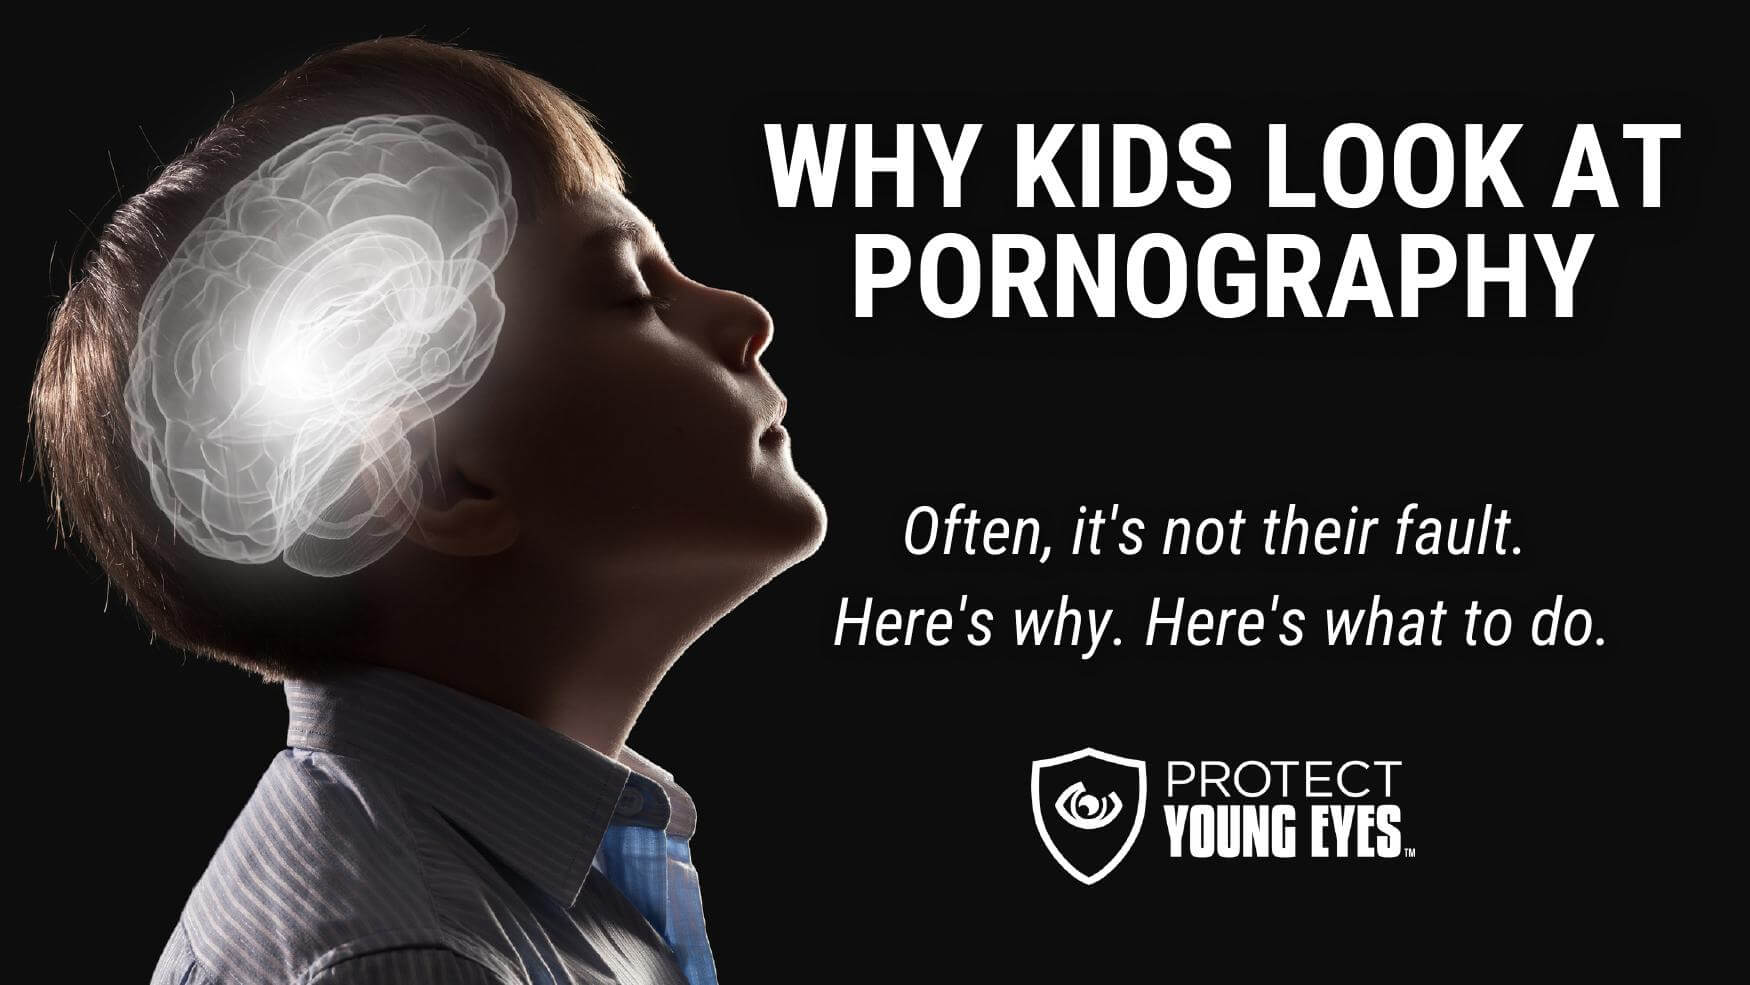 Xxx Vedio 15 Eyar - Why Kids Look at Pornography (It's not their fault) - Protect Young Eyes